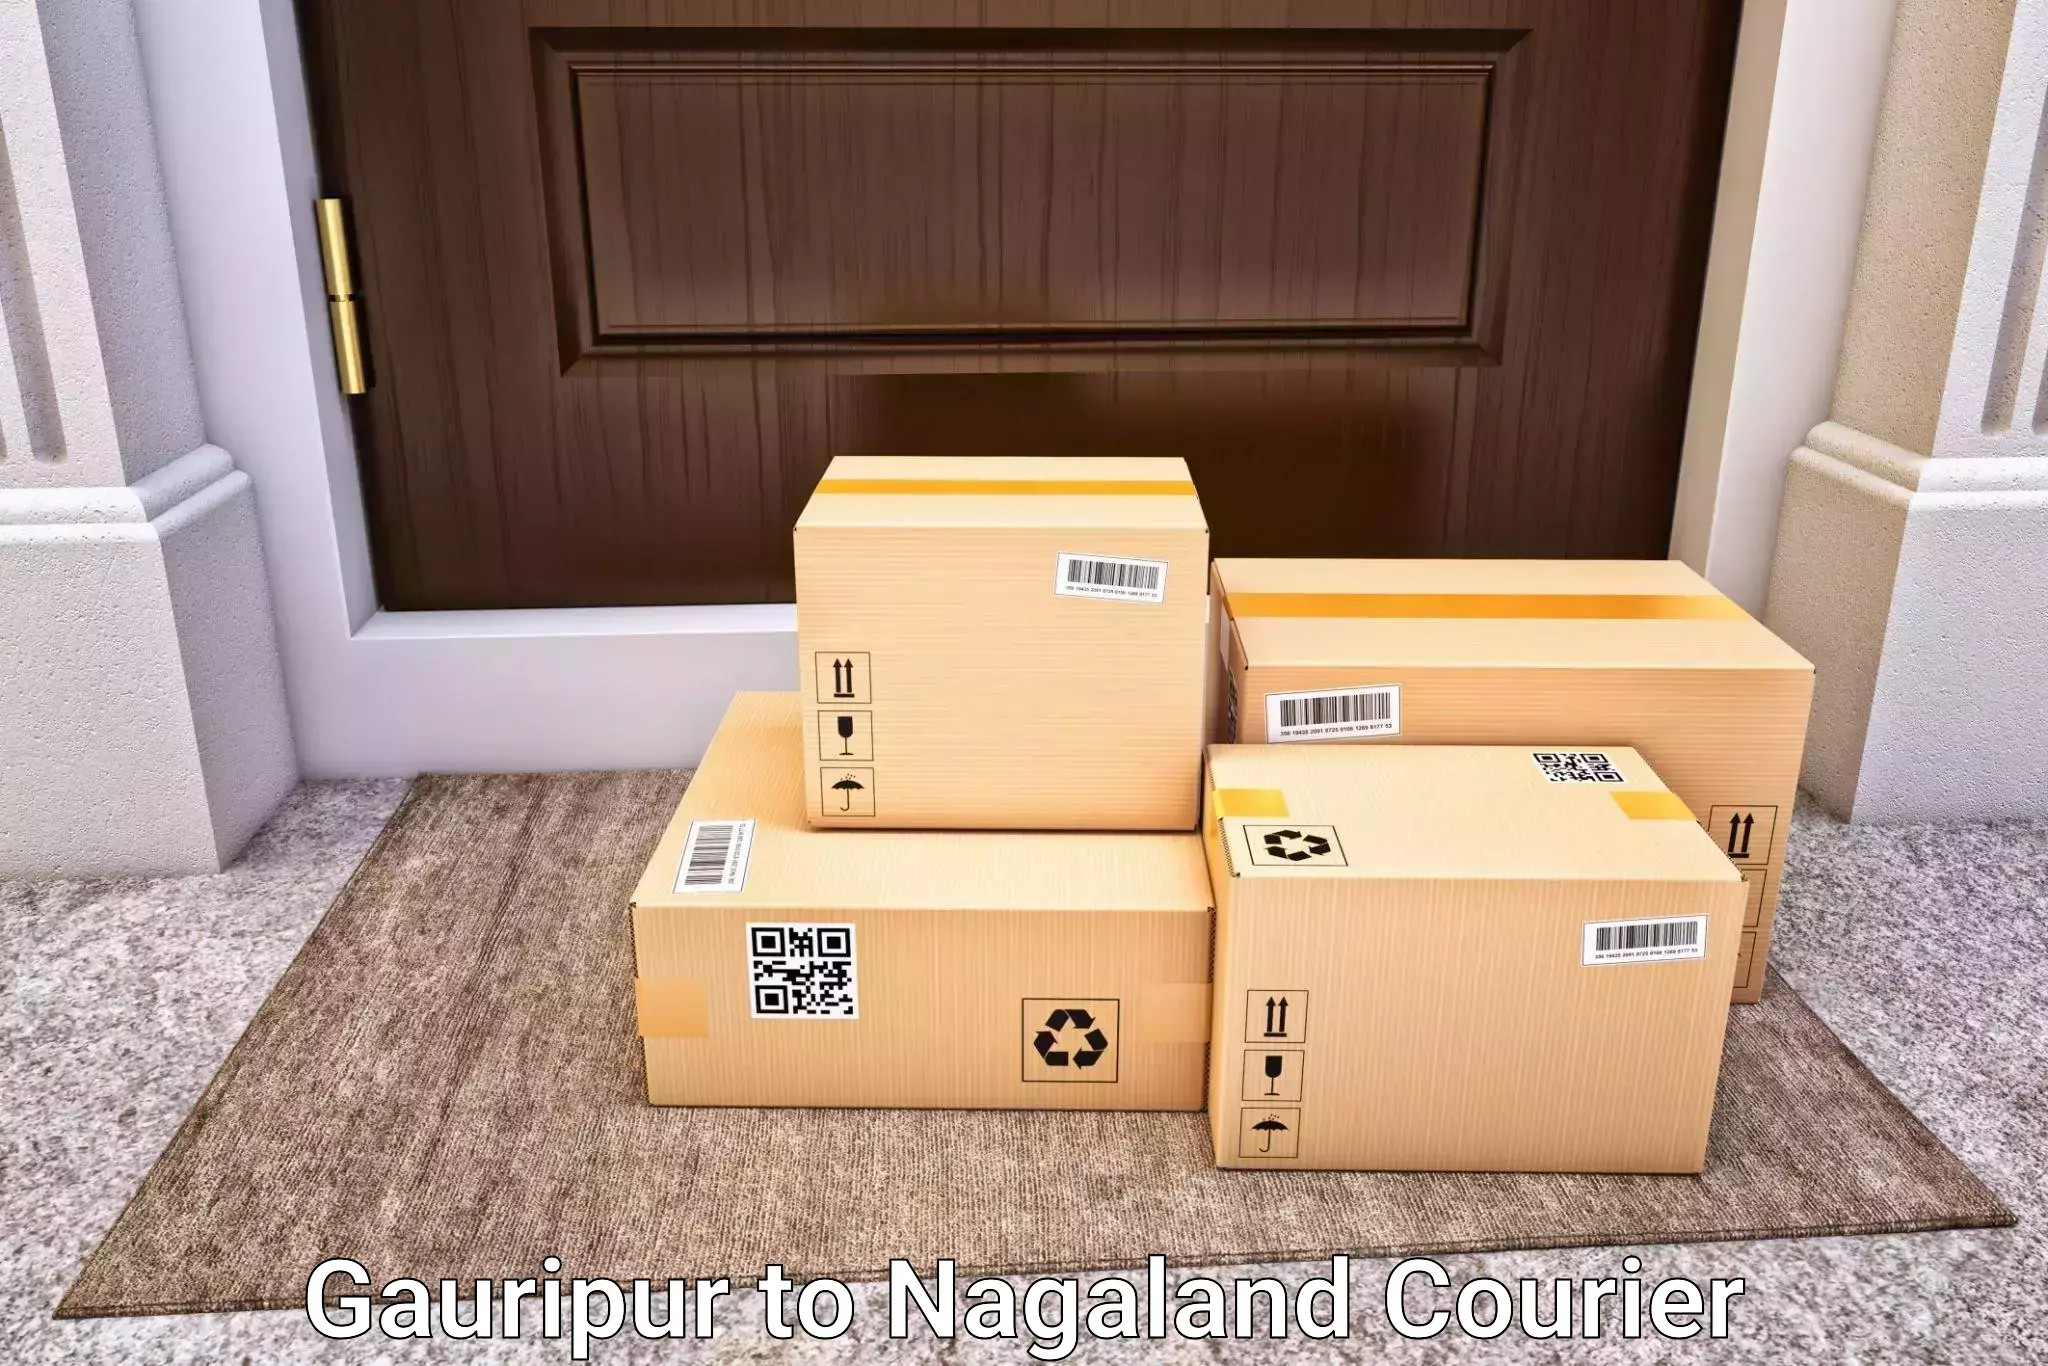 Luggage transport consulting Gauripur to Nagaland